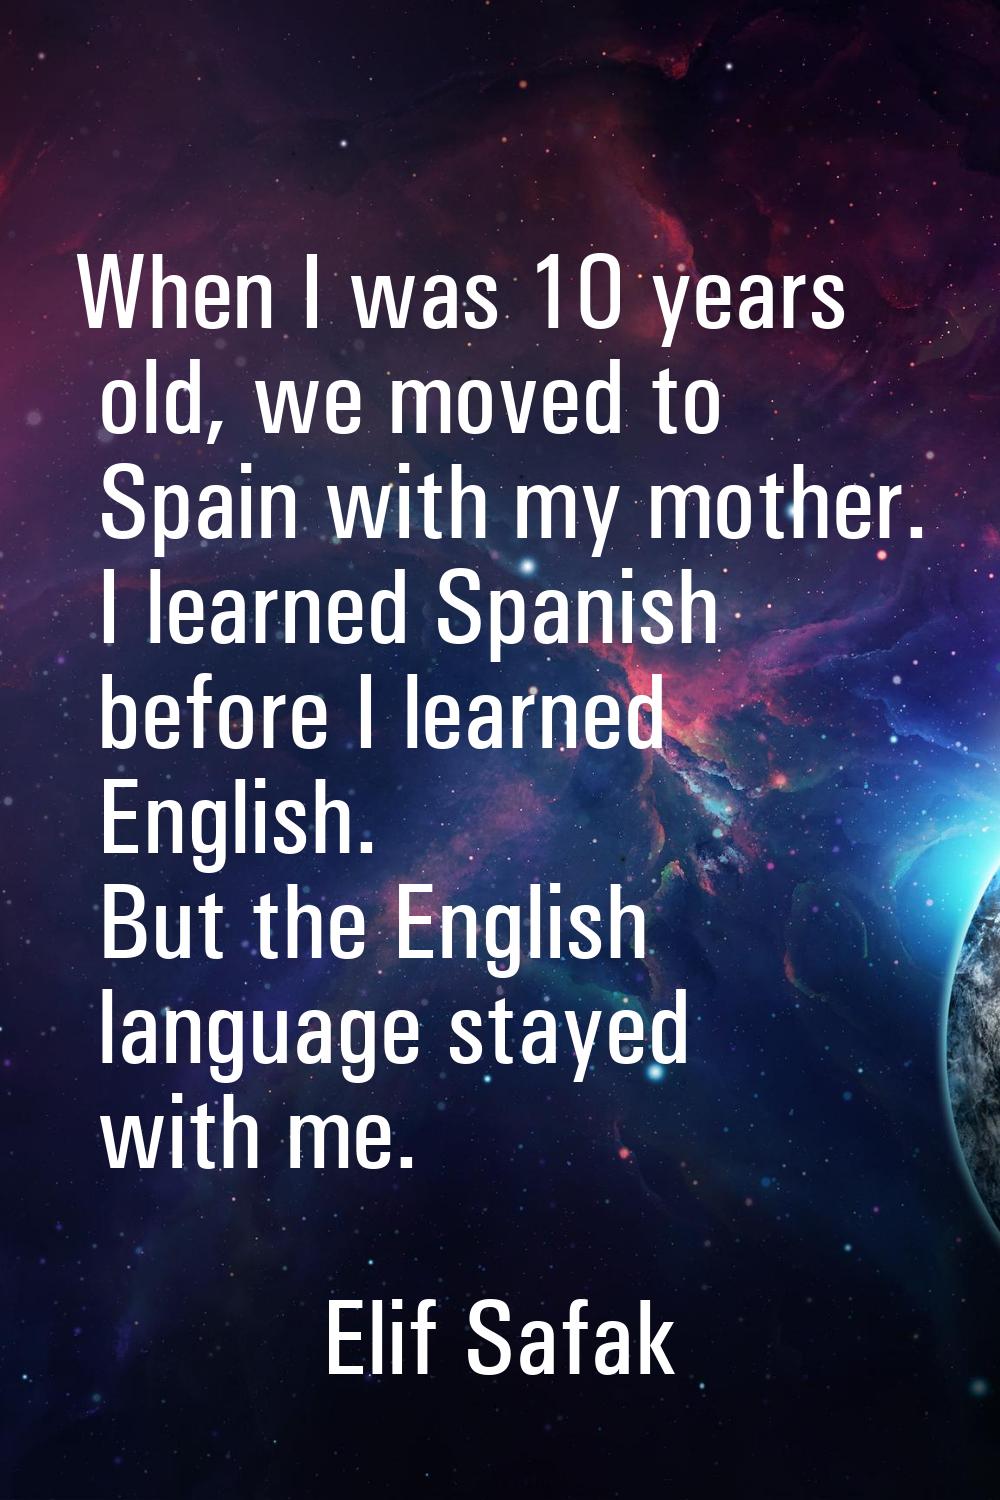 When I was 10 years old, we moved to Spain with my mother. I learned Spanish before I learned Engli